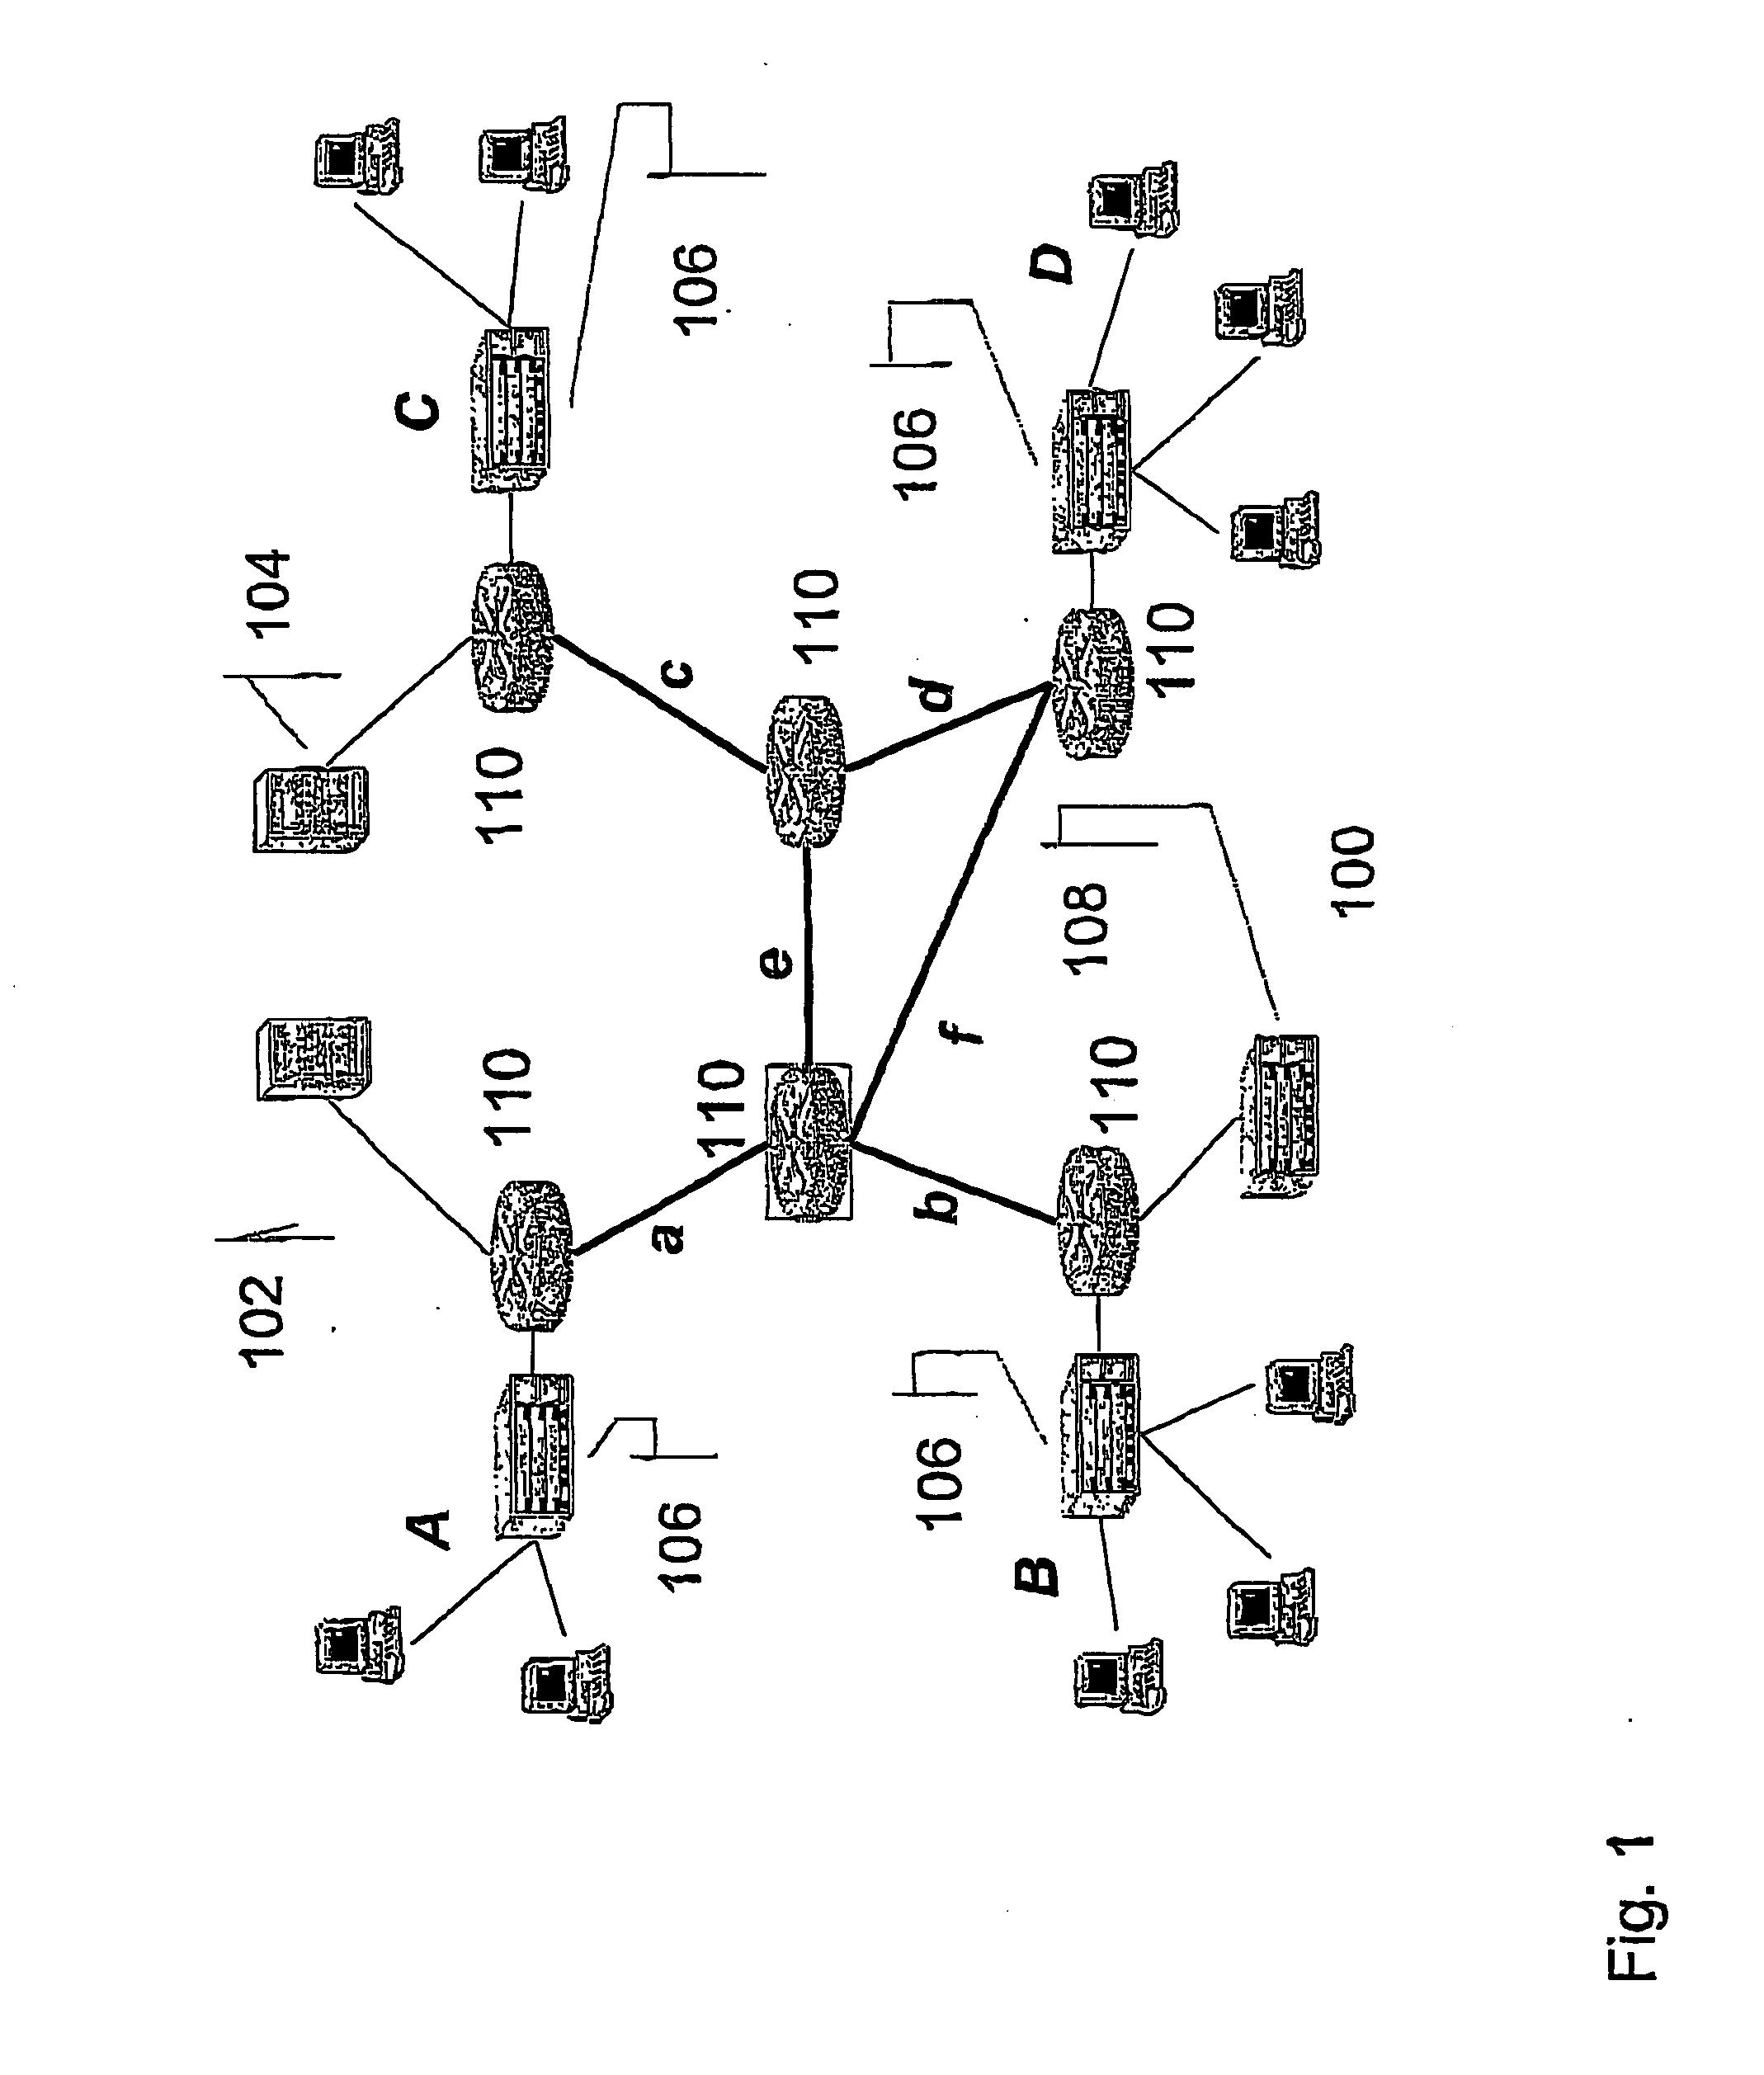 Method and node for controlling the forwarding quality in a data network